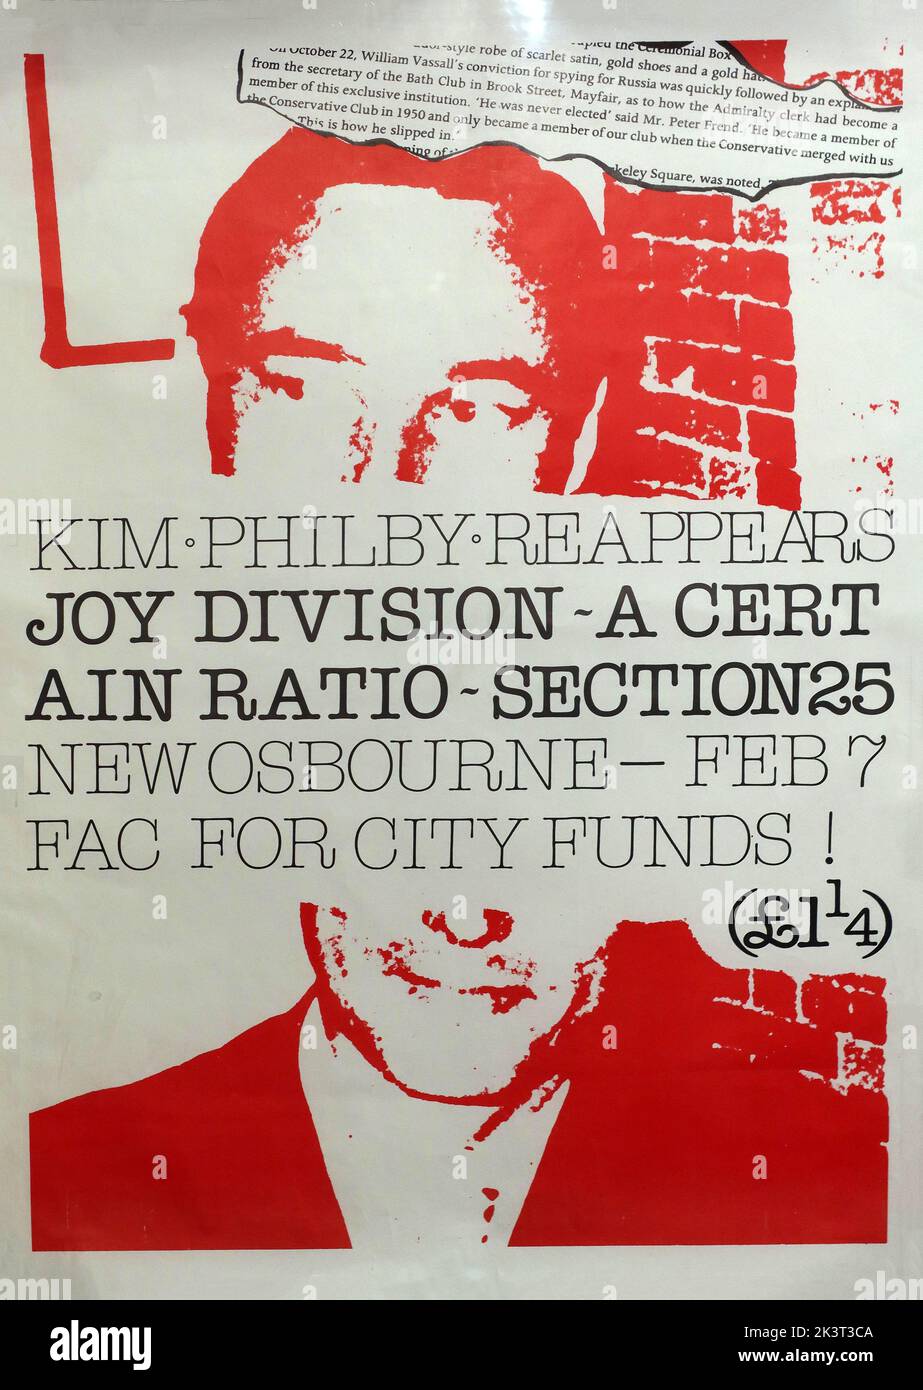 Kim Philby Reappears,Joy Division,A Certain Ratio,Section25,New Osbourne,Feb7 FAC for city funds poster Stock Photo